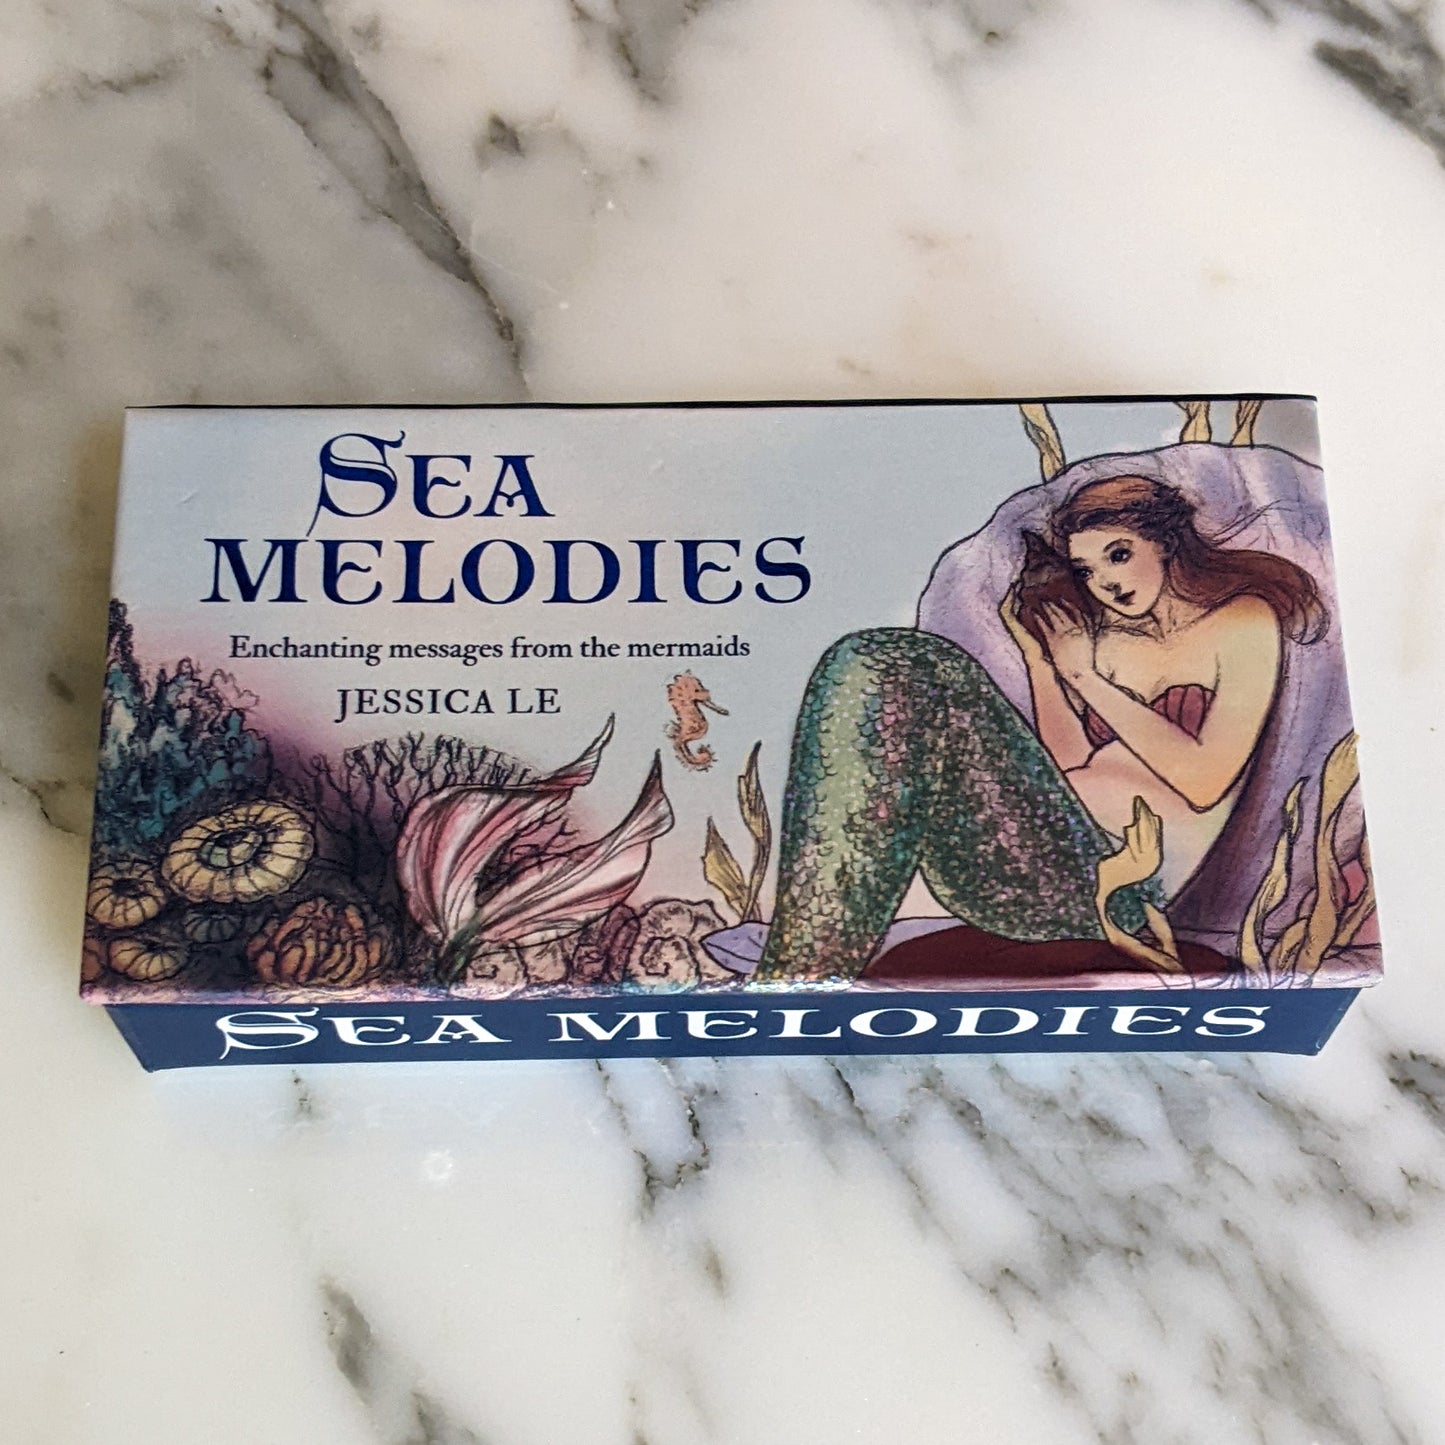 Sea Melodies - Enchanting messages from the mermaids (Card Deck)